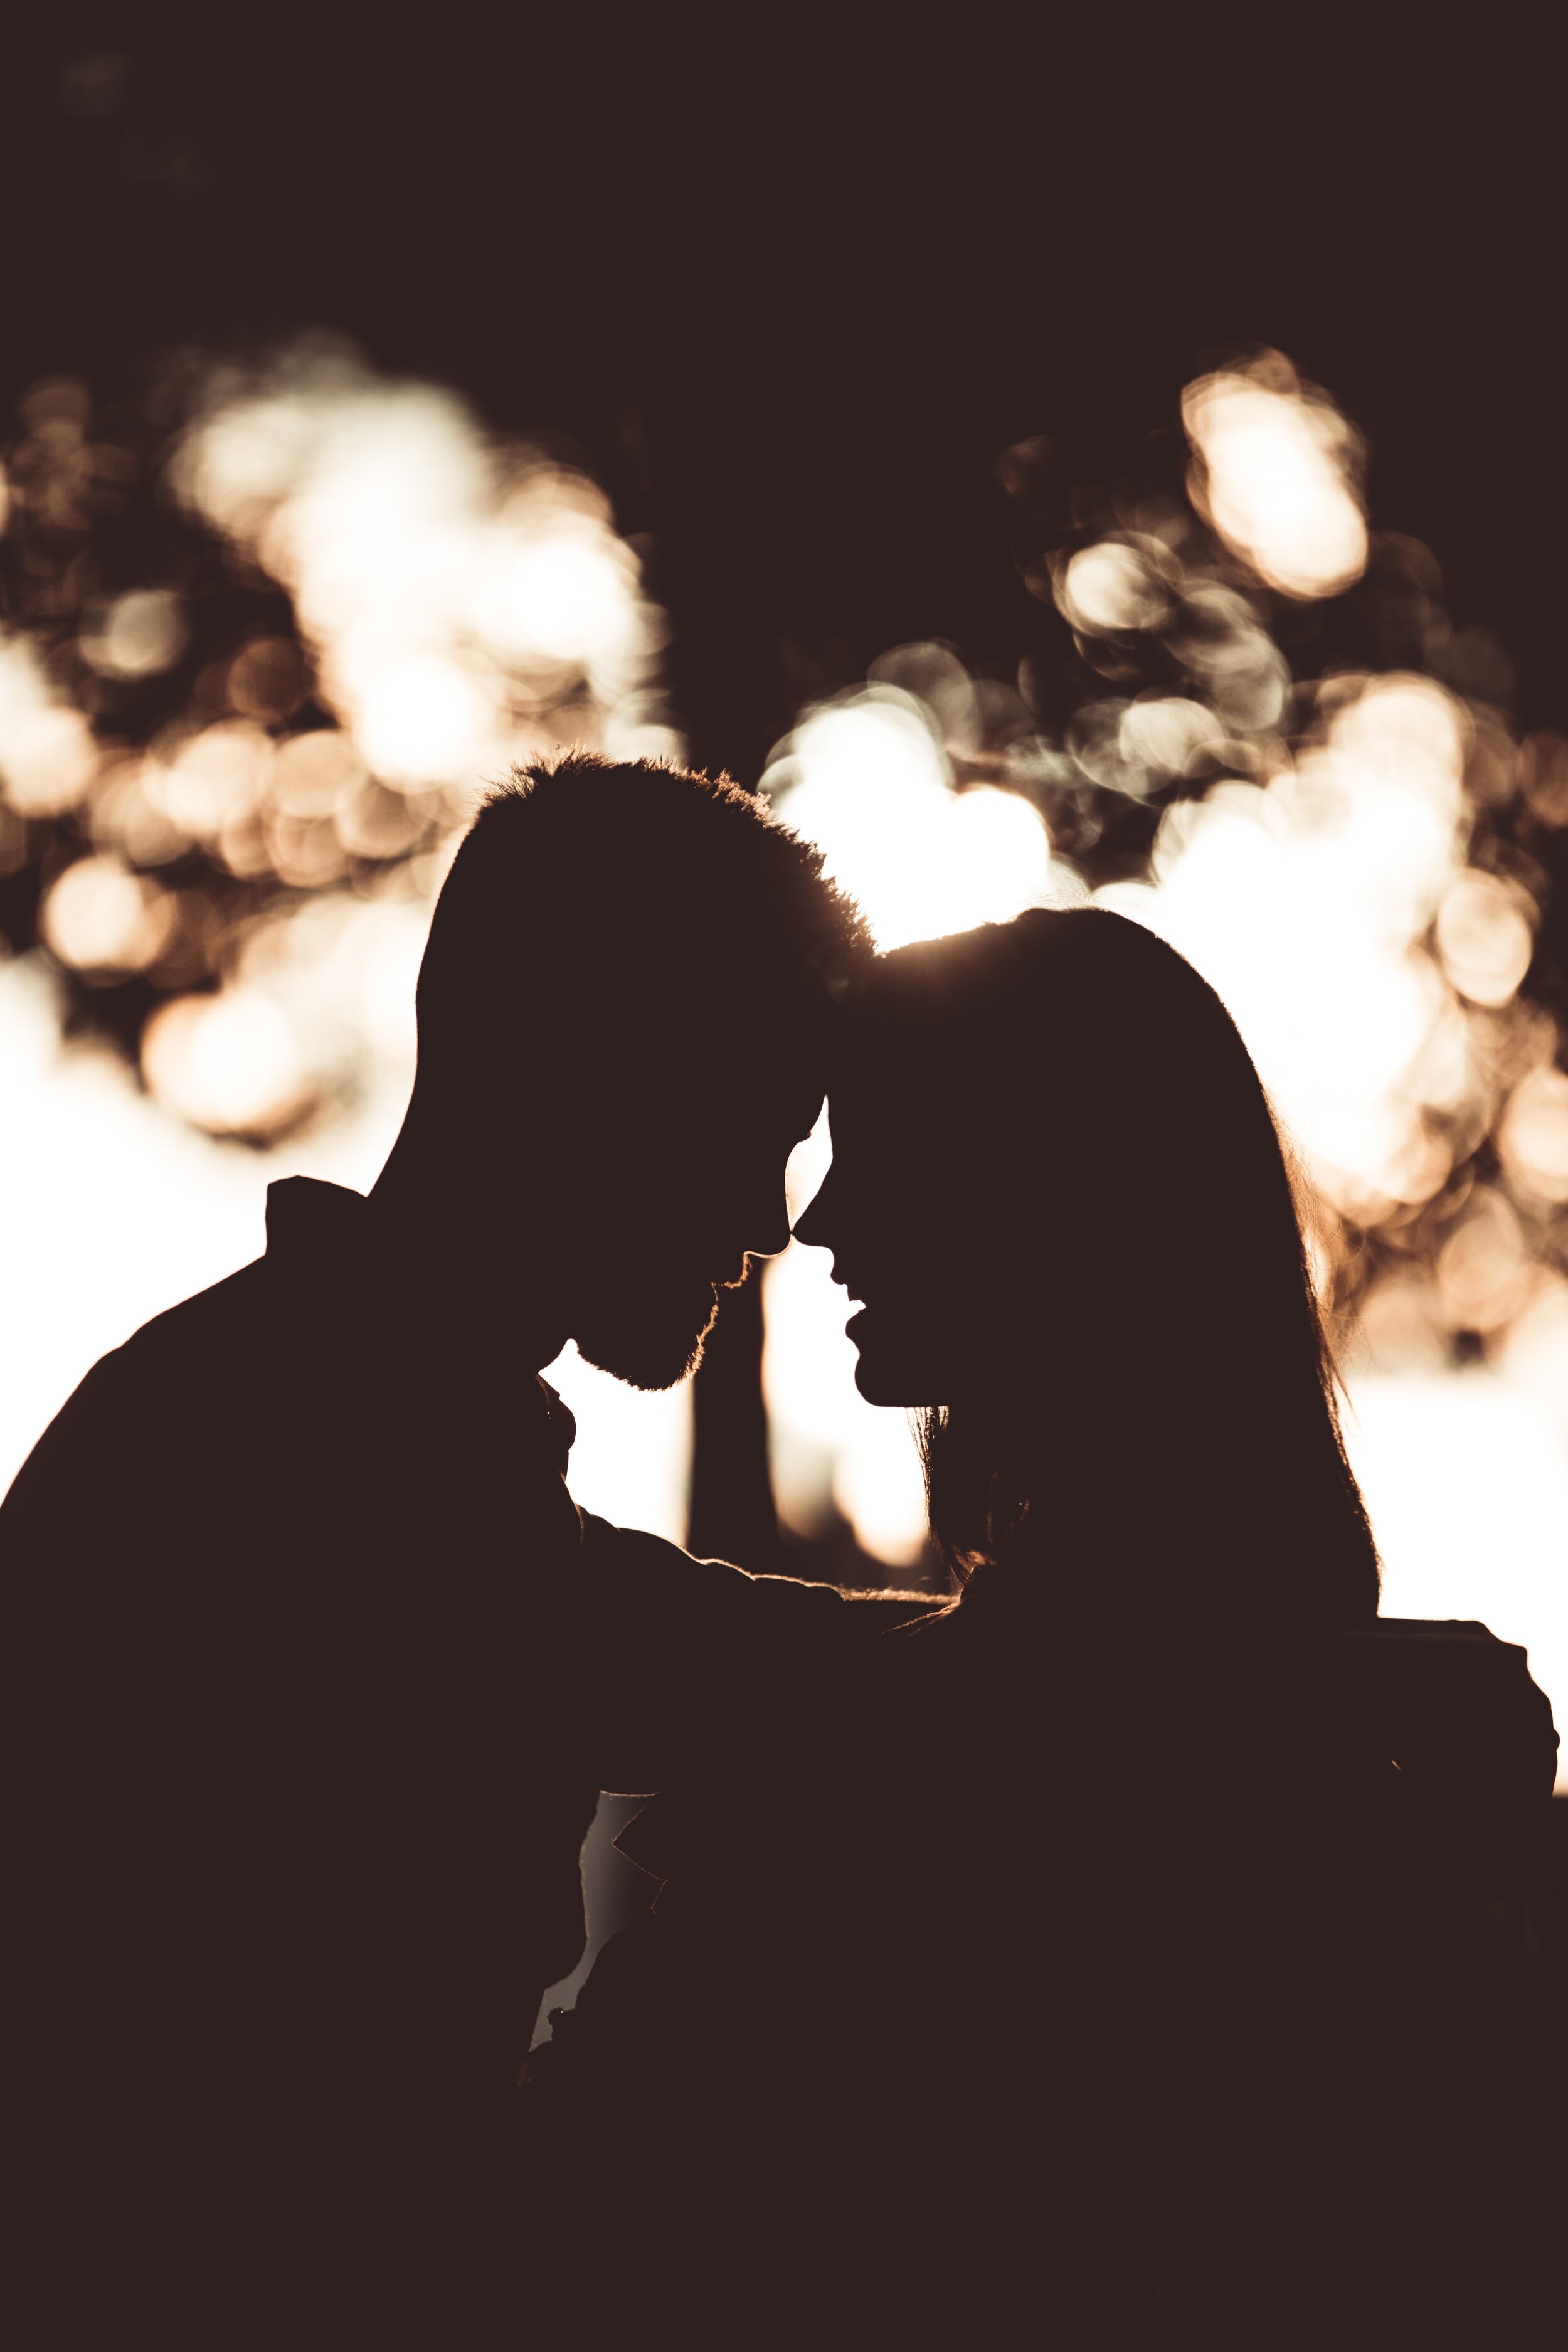 Couple in the twilight hugging and touching foreheads photo by Sean Stratton on Unsplash